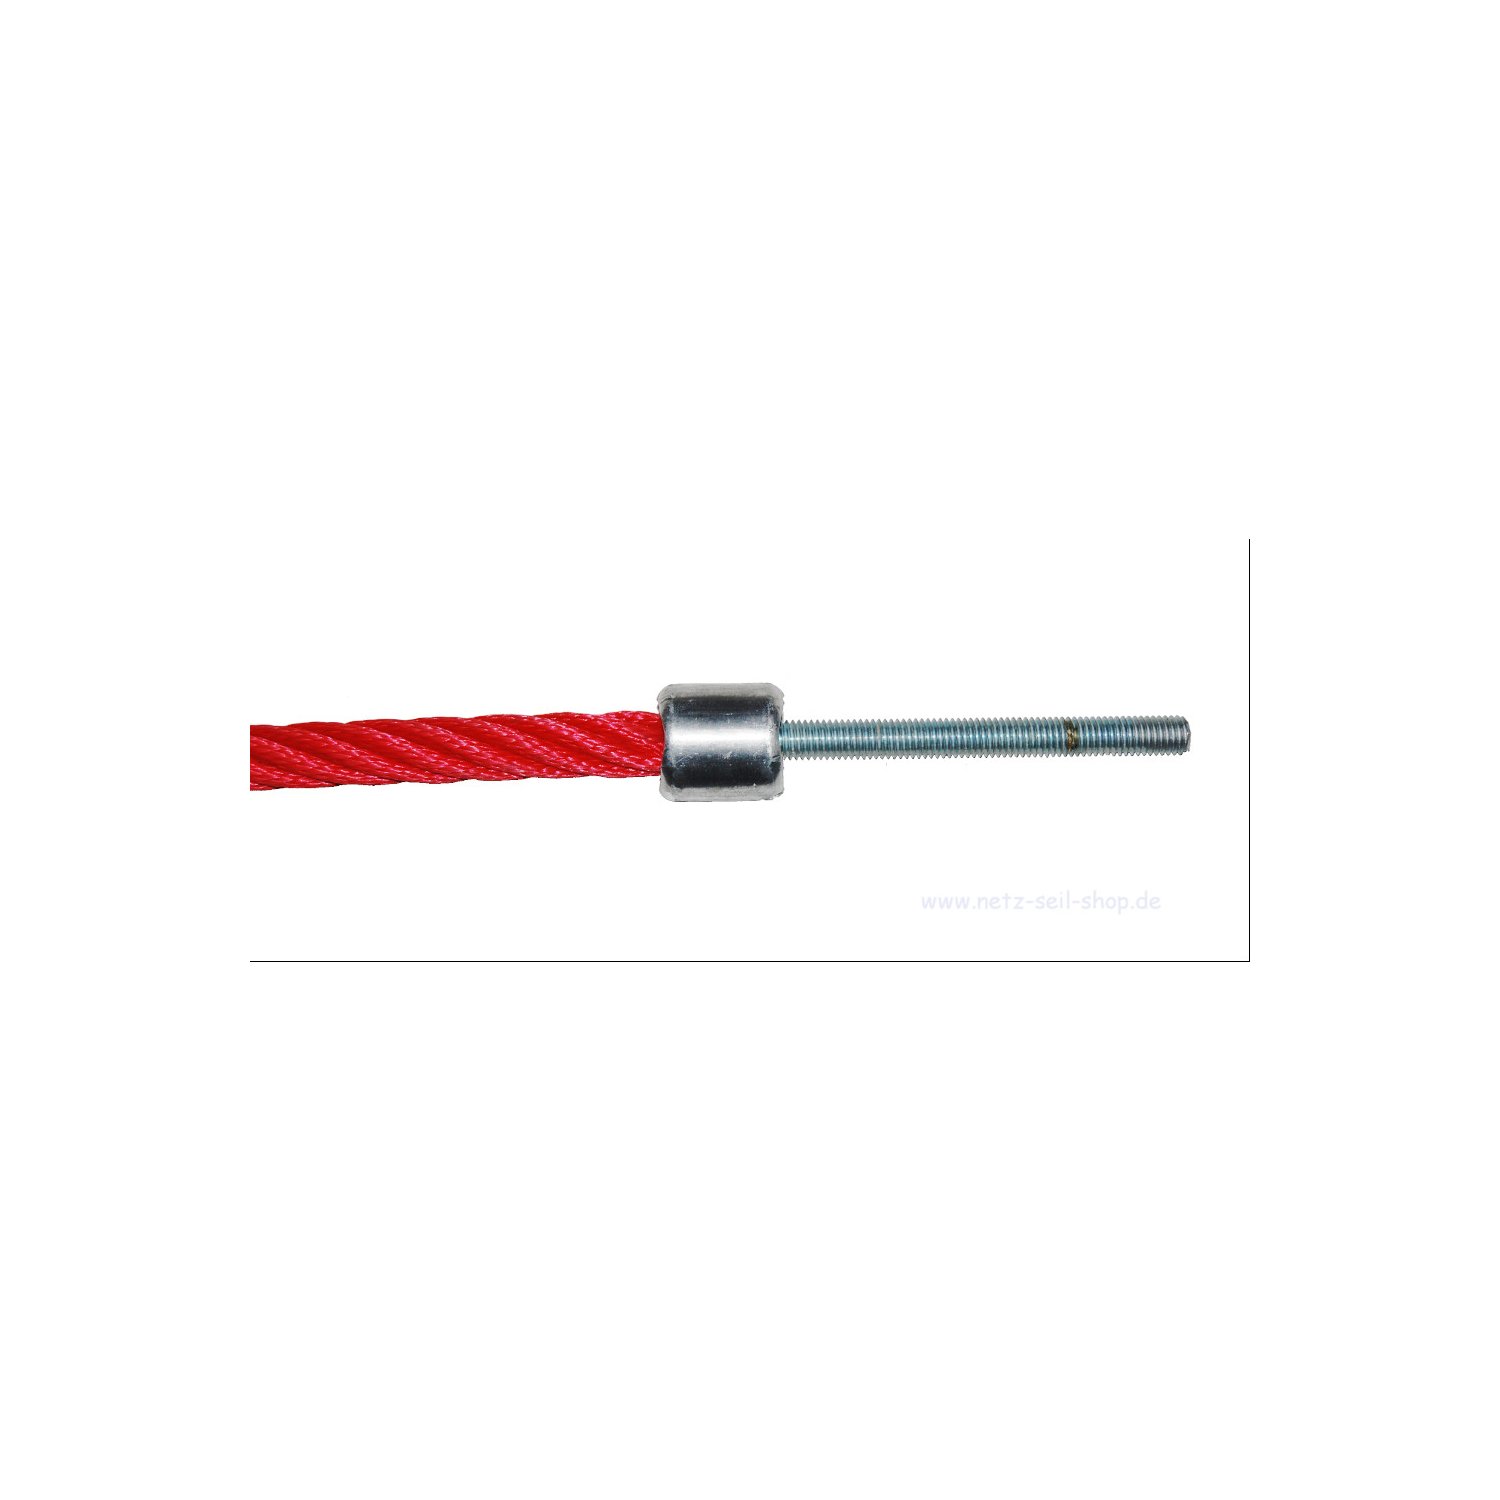 Stainless steel threaded bolt M12 x 200 mm, V2A, directly pressed [13,68 EUR]